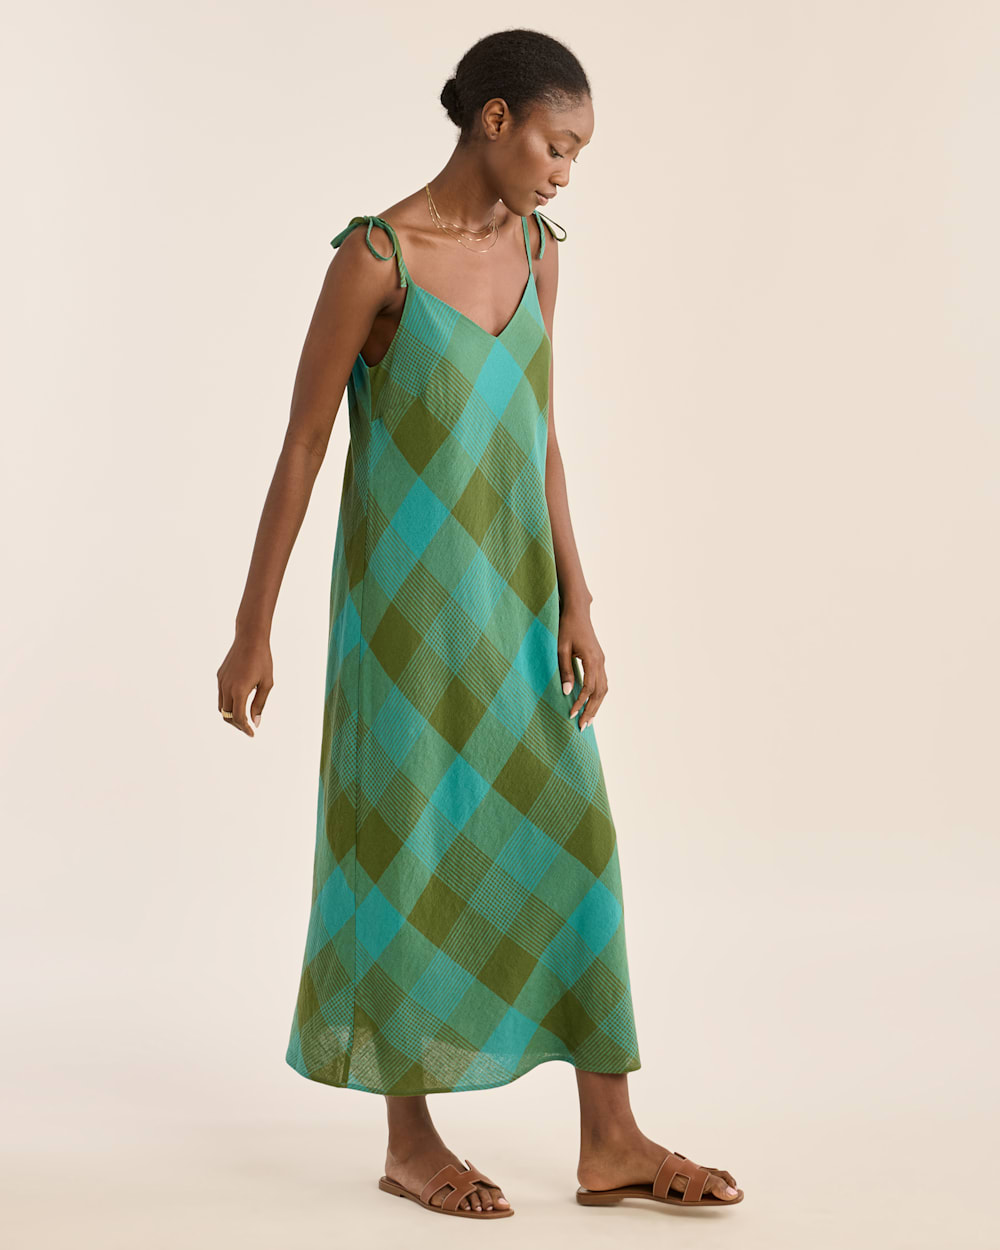 ALTERNATE VIEW OF WOMEN'S ASTORIA SLIP DRESS IN TEAL/GREEN CHECK image number 2